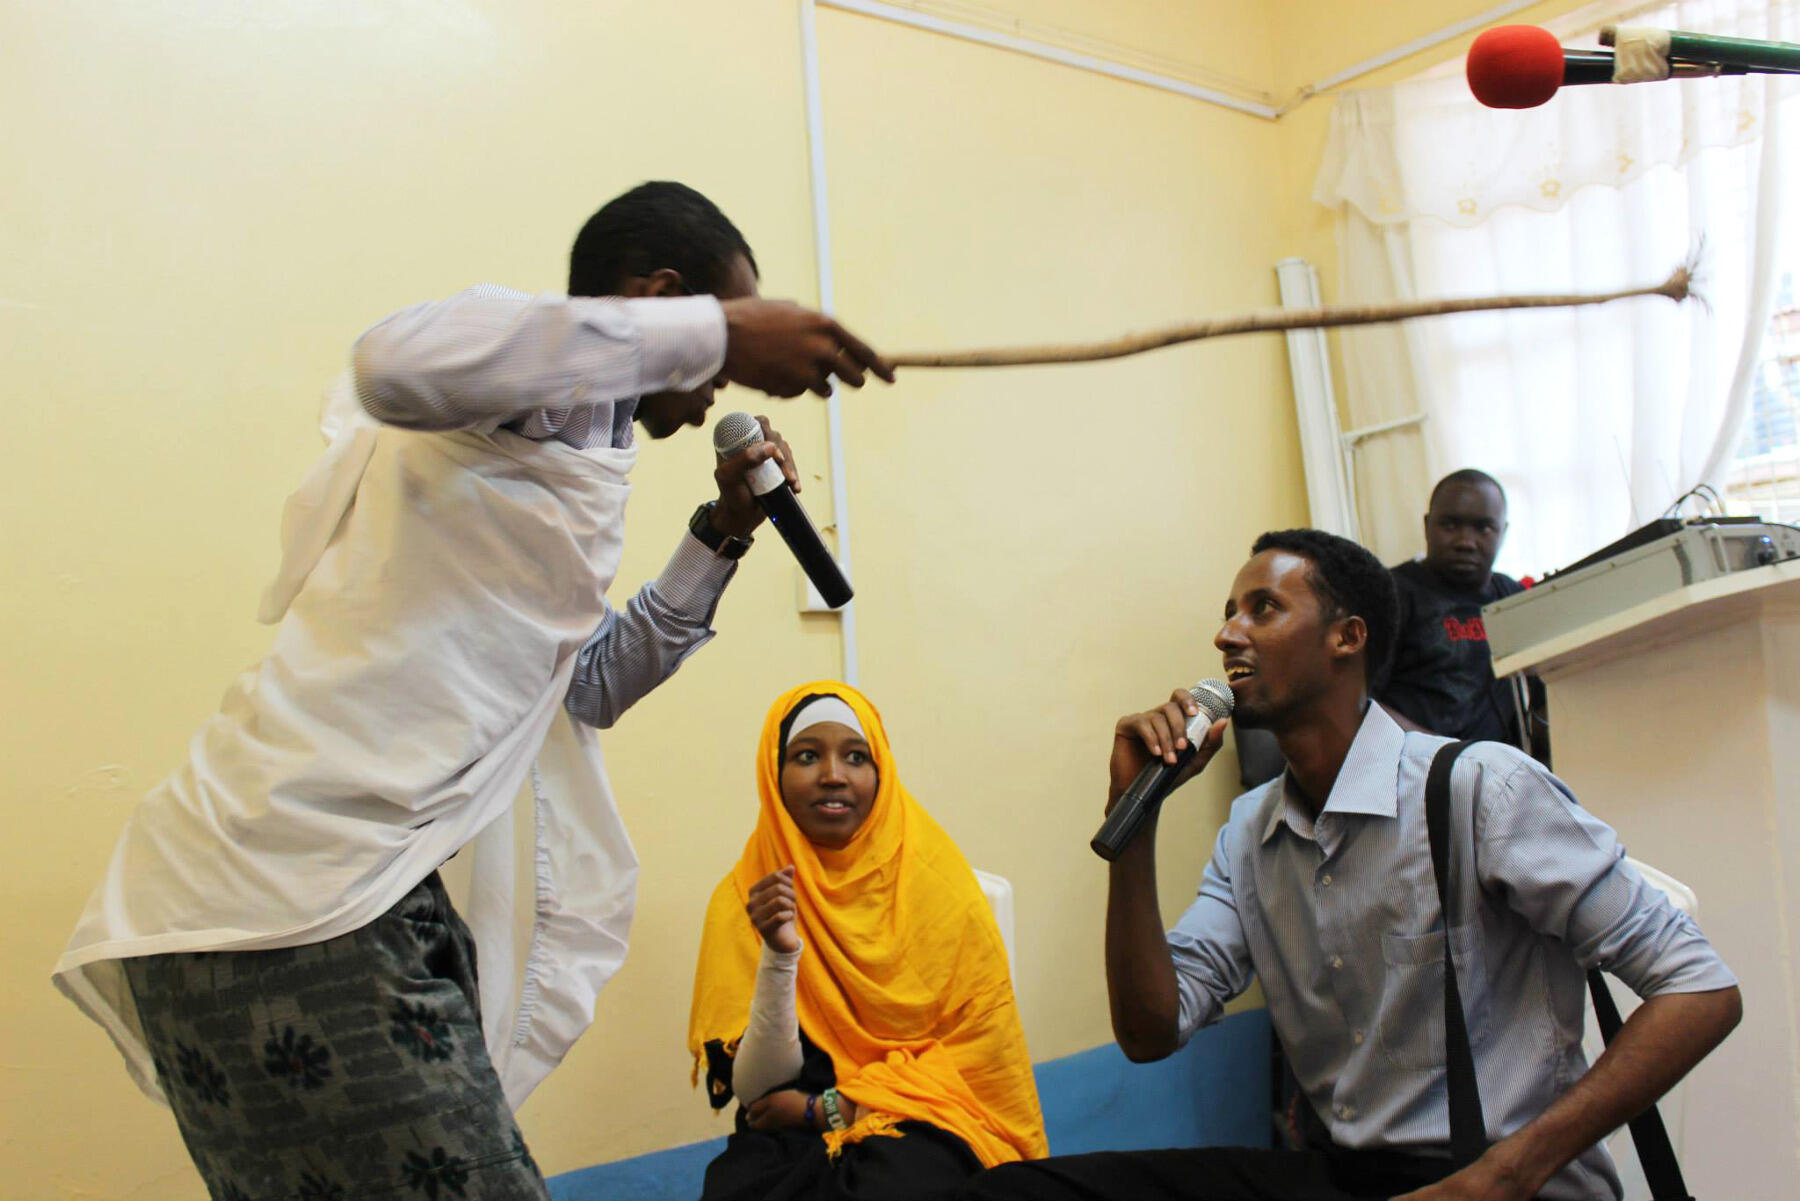 Youth leaders and staffers of the mental health clinic in Nairobi perform a play about substance abuse and domestic violence.
<br>Photo by Hyojin Im.
